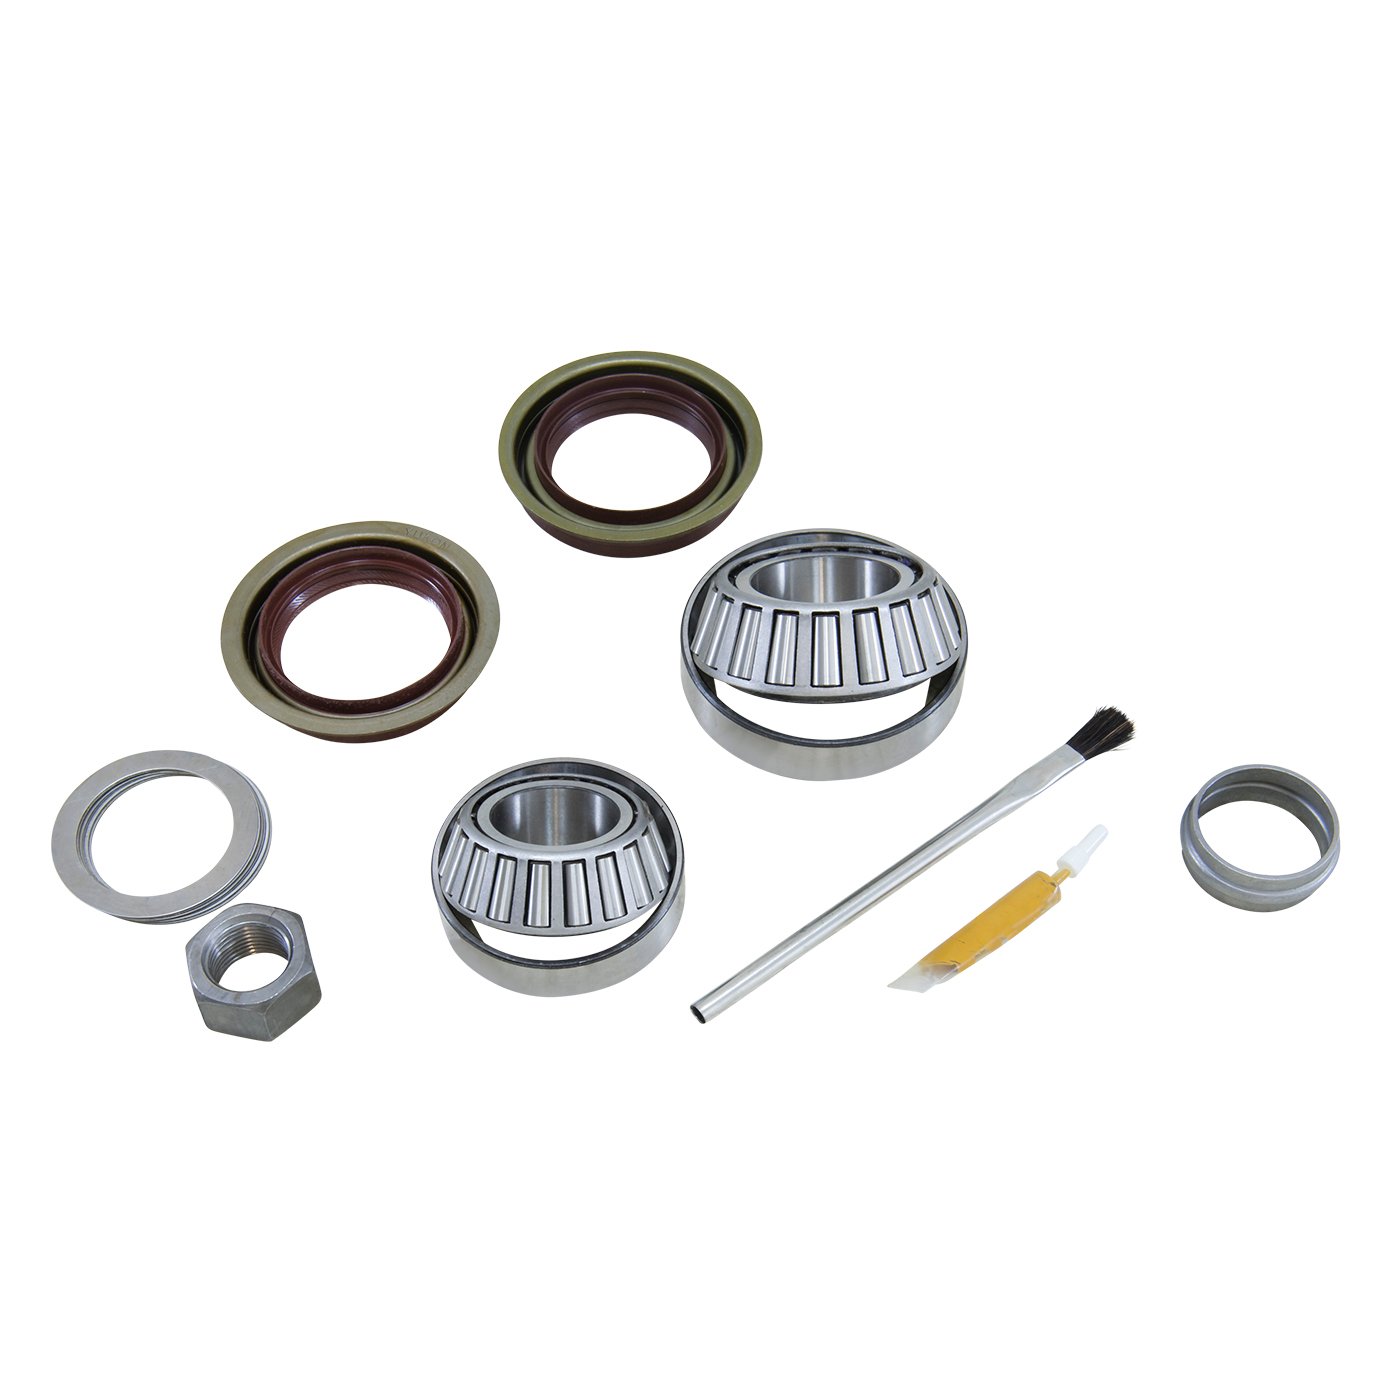 USA Standard ZPKF8.8A Pinion Installation Kit, For '09 & Down Ford 8.8